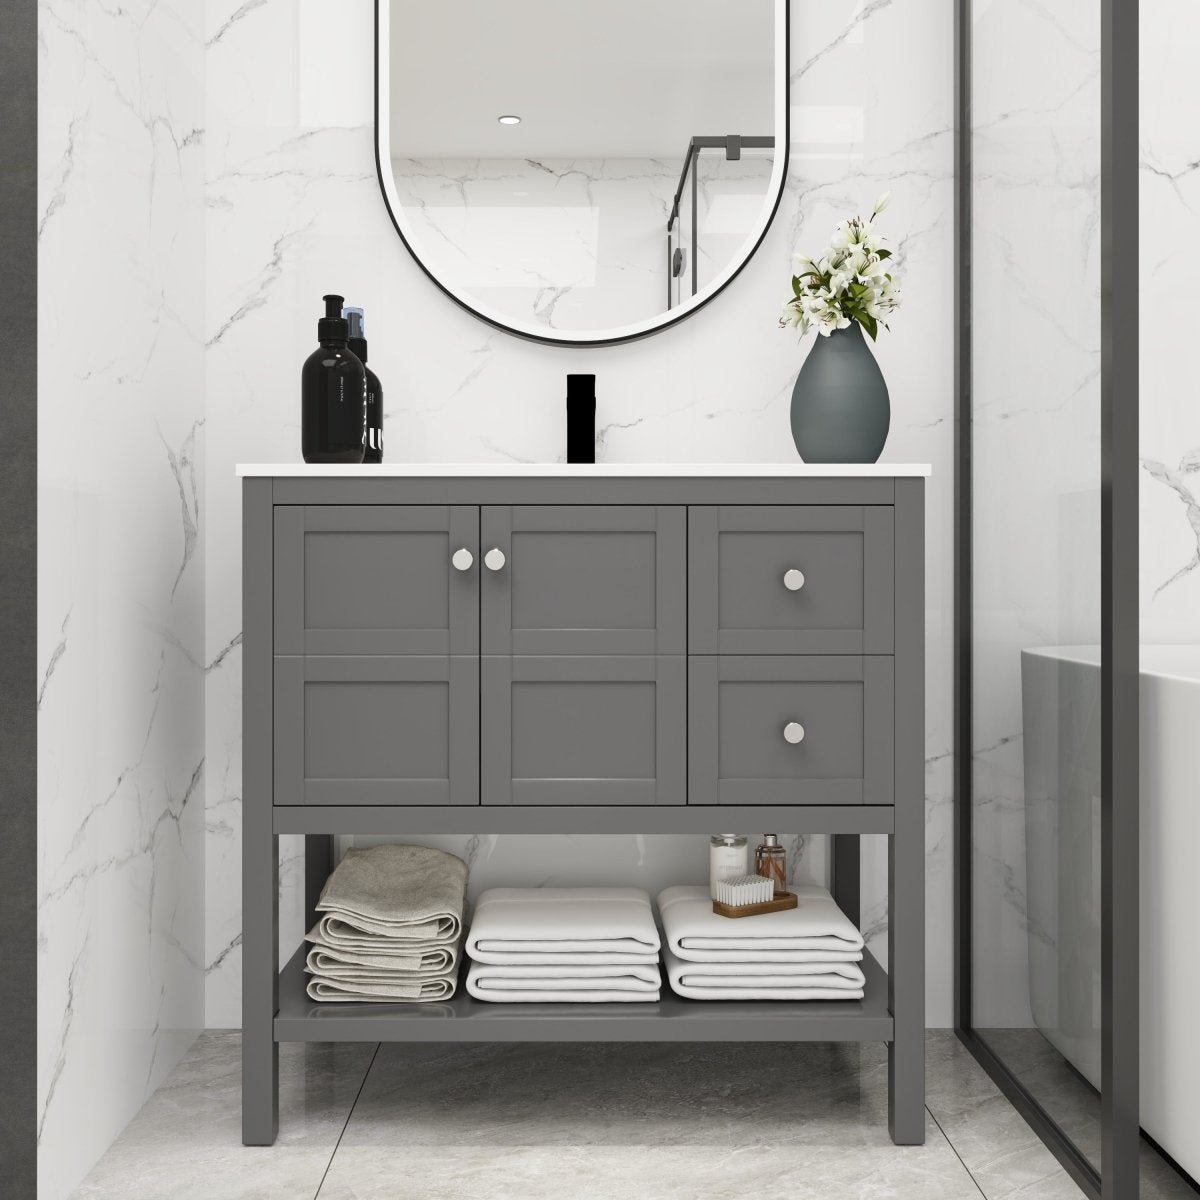 ExBrite 36x18 Bathroom Vanity With Soft Close Drawers And Gel Basin